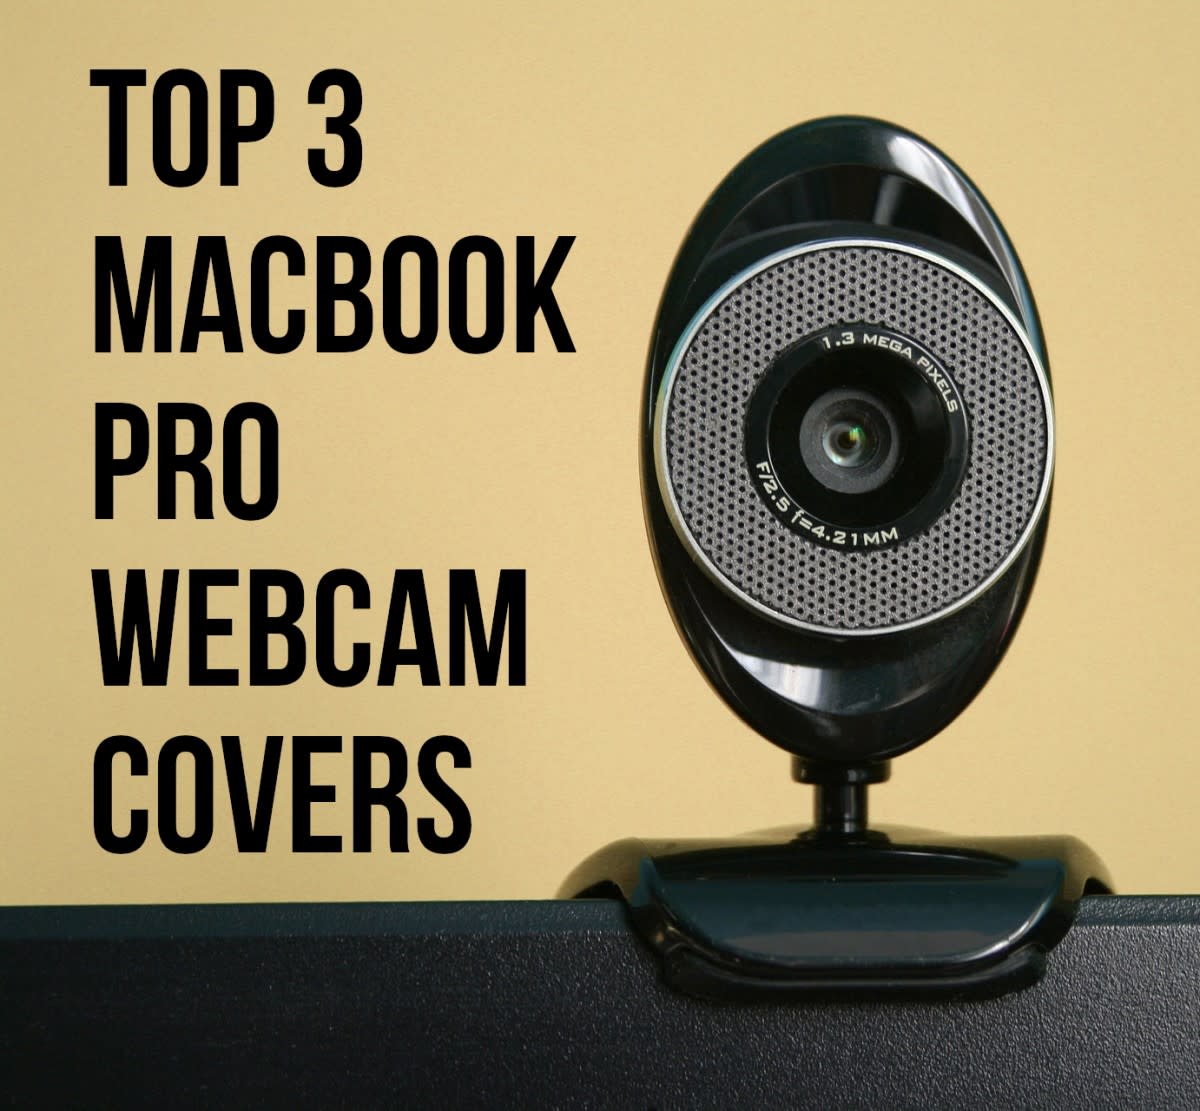 Best 3 Webcam Covers for a MacBook Pro - TurboFuture